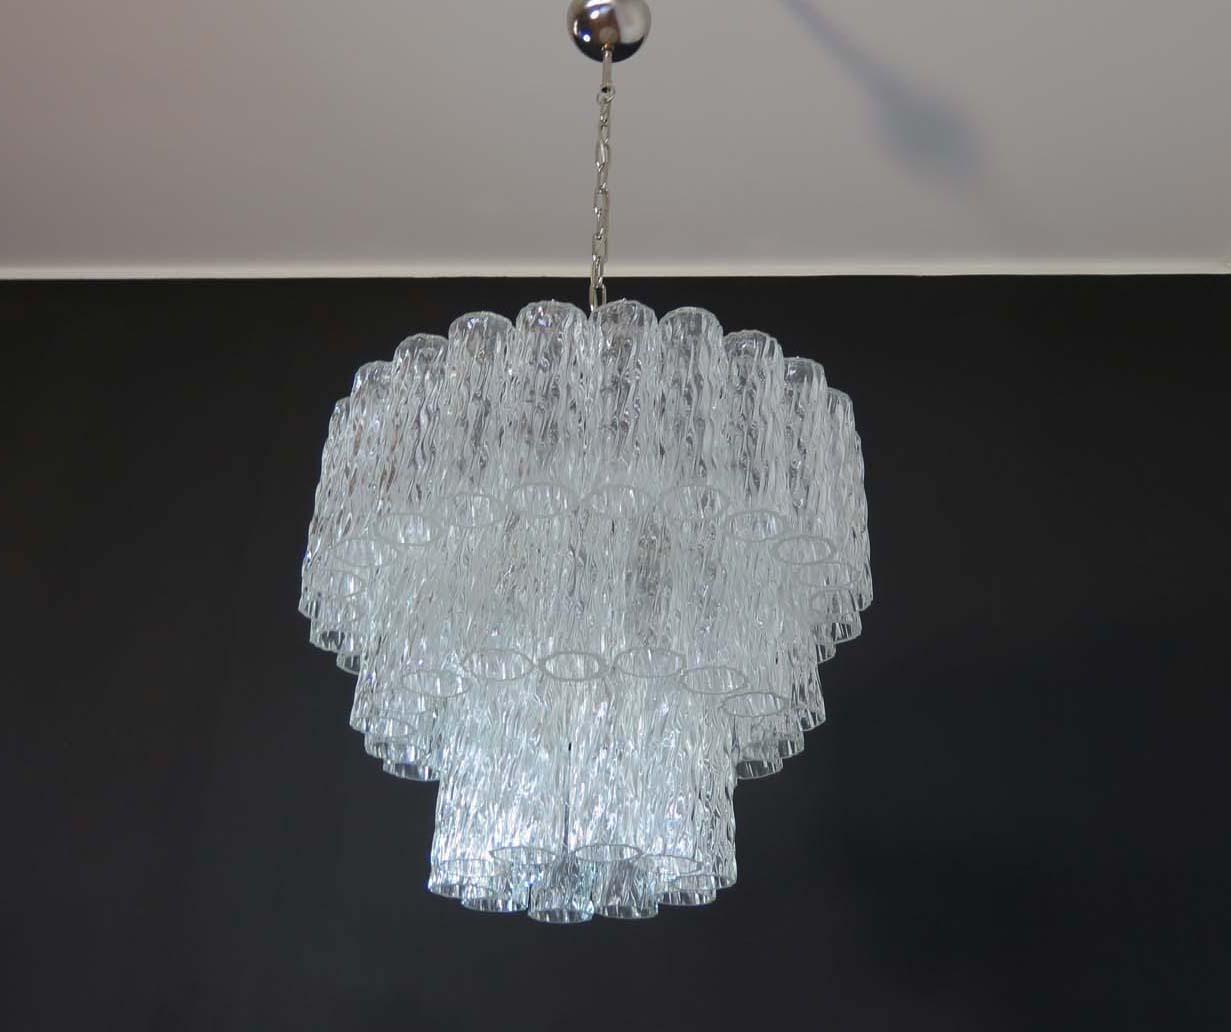 Italian vintage chandelier in Murano glass and nickel-plated metal structure. The polisched nikel armature supports 52 large clear glass tubes which have a slightly textured effect to create an impressive 